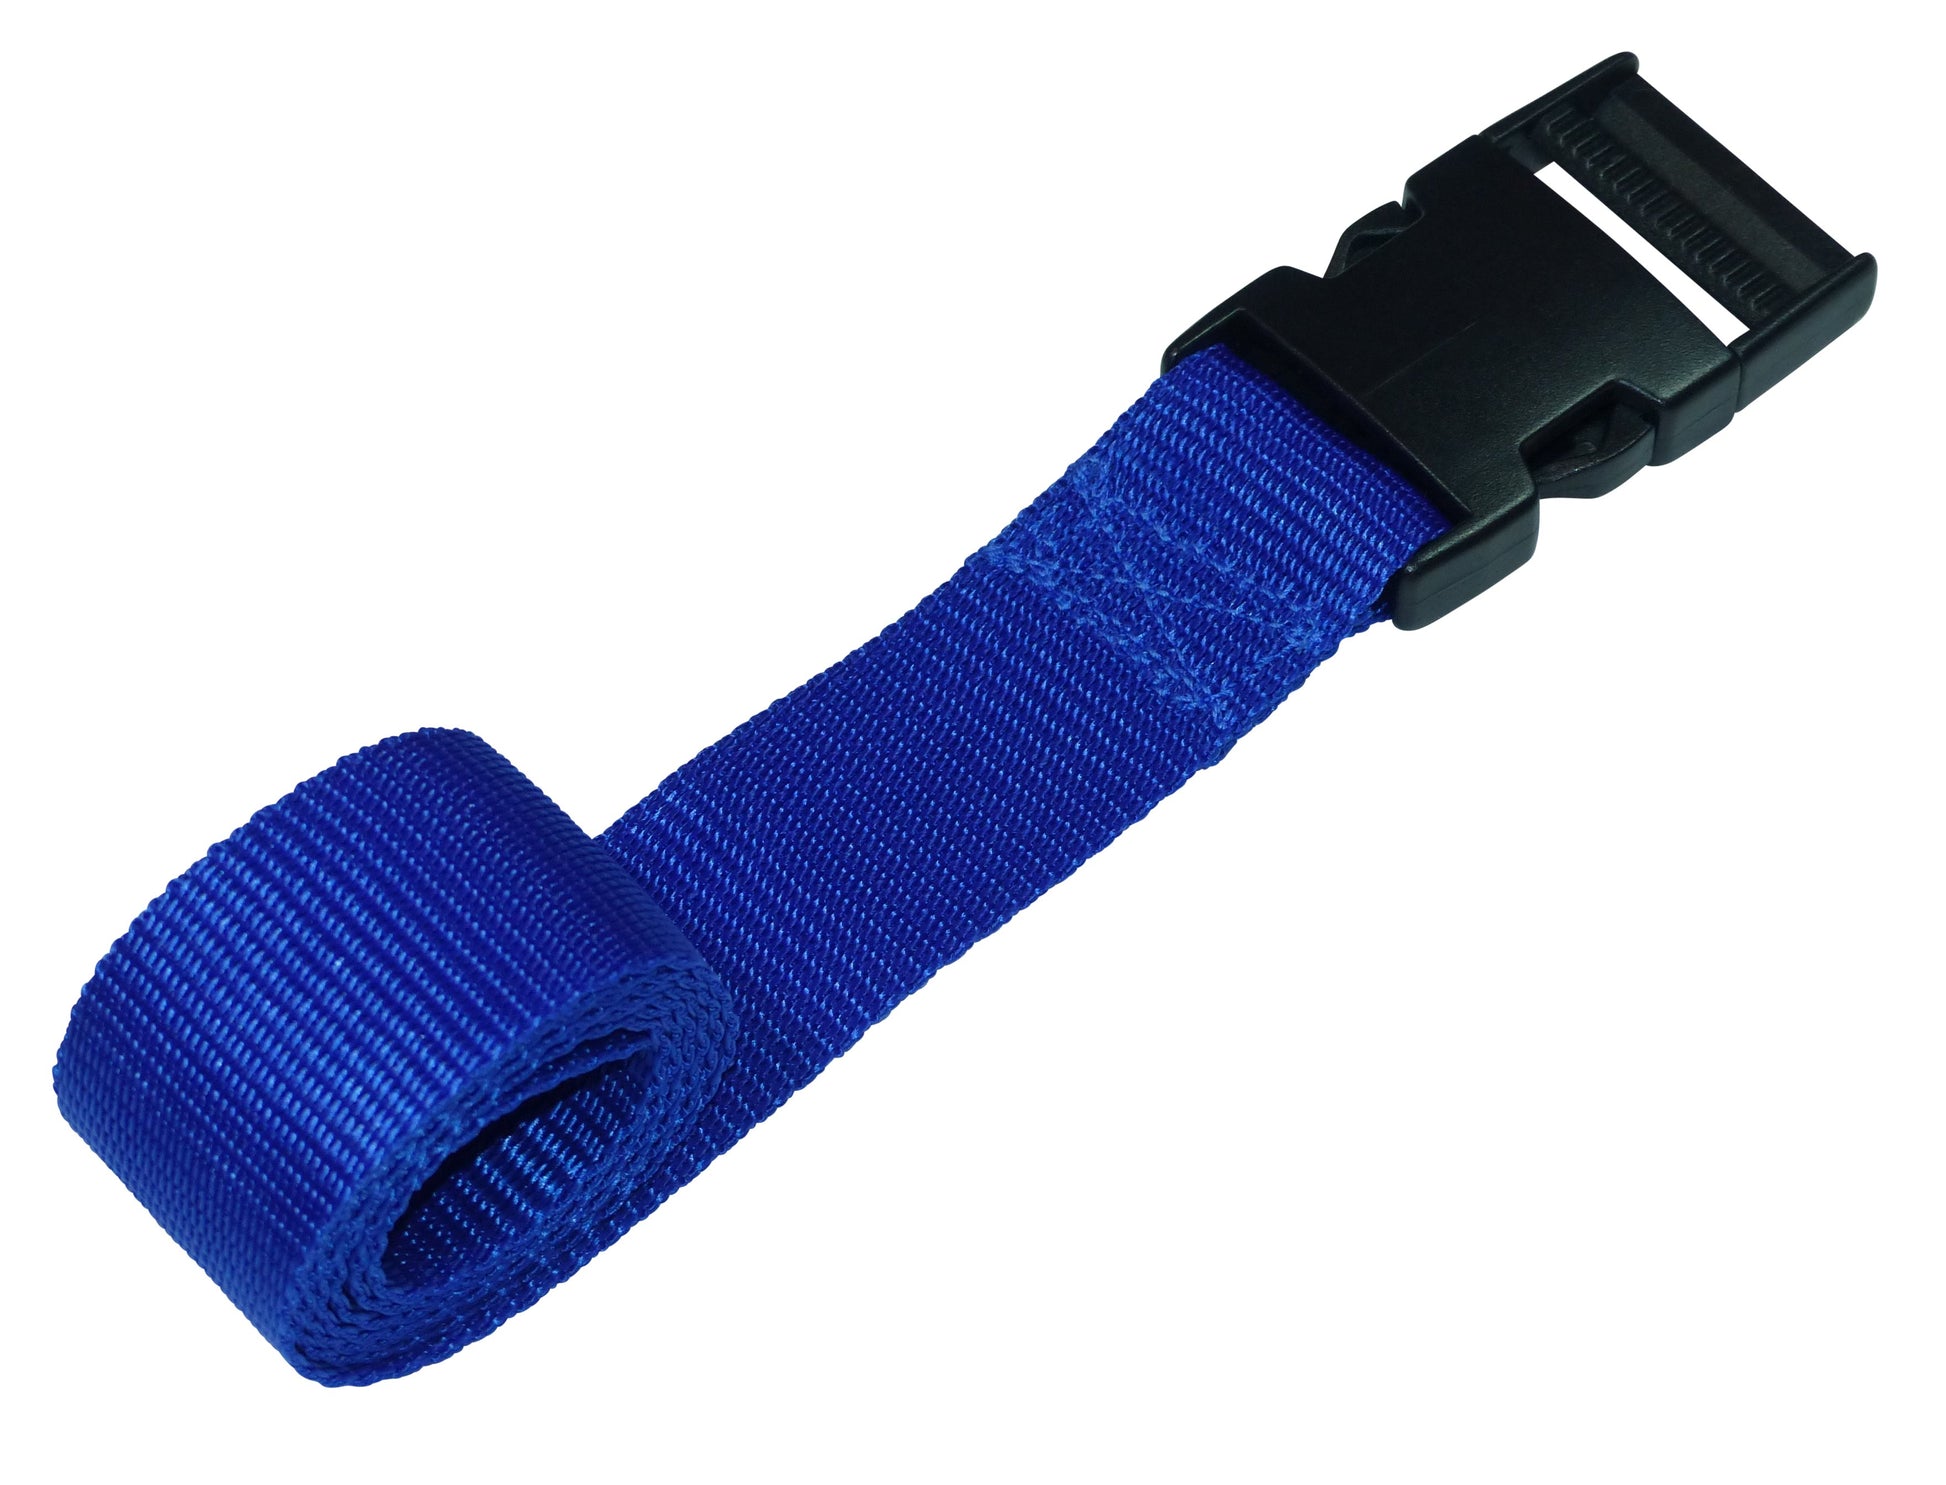 Benristraps 38mm Webbing Strap with Quick Release Buckle in blue